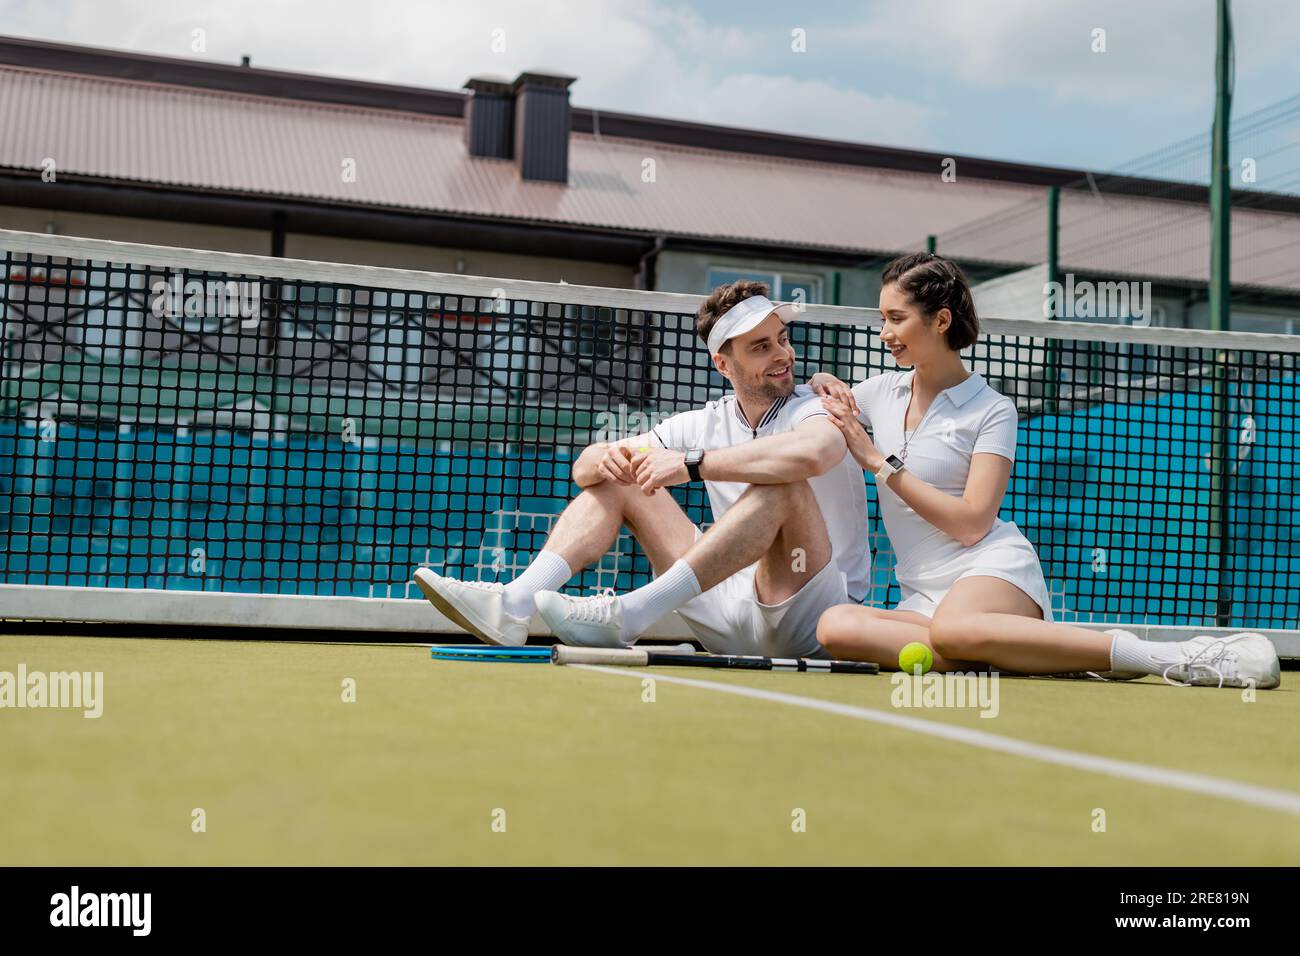 healthy lifestyle, cheerful man and woman sitting near tennis net, racket and ball, positivity Stock Photo